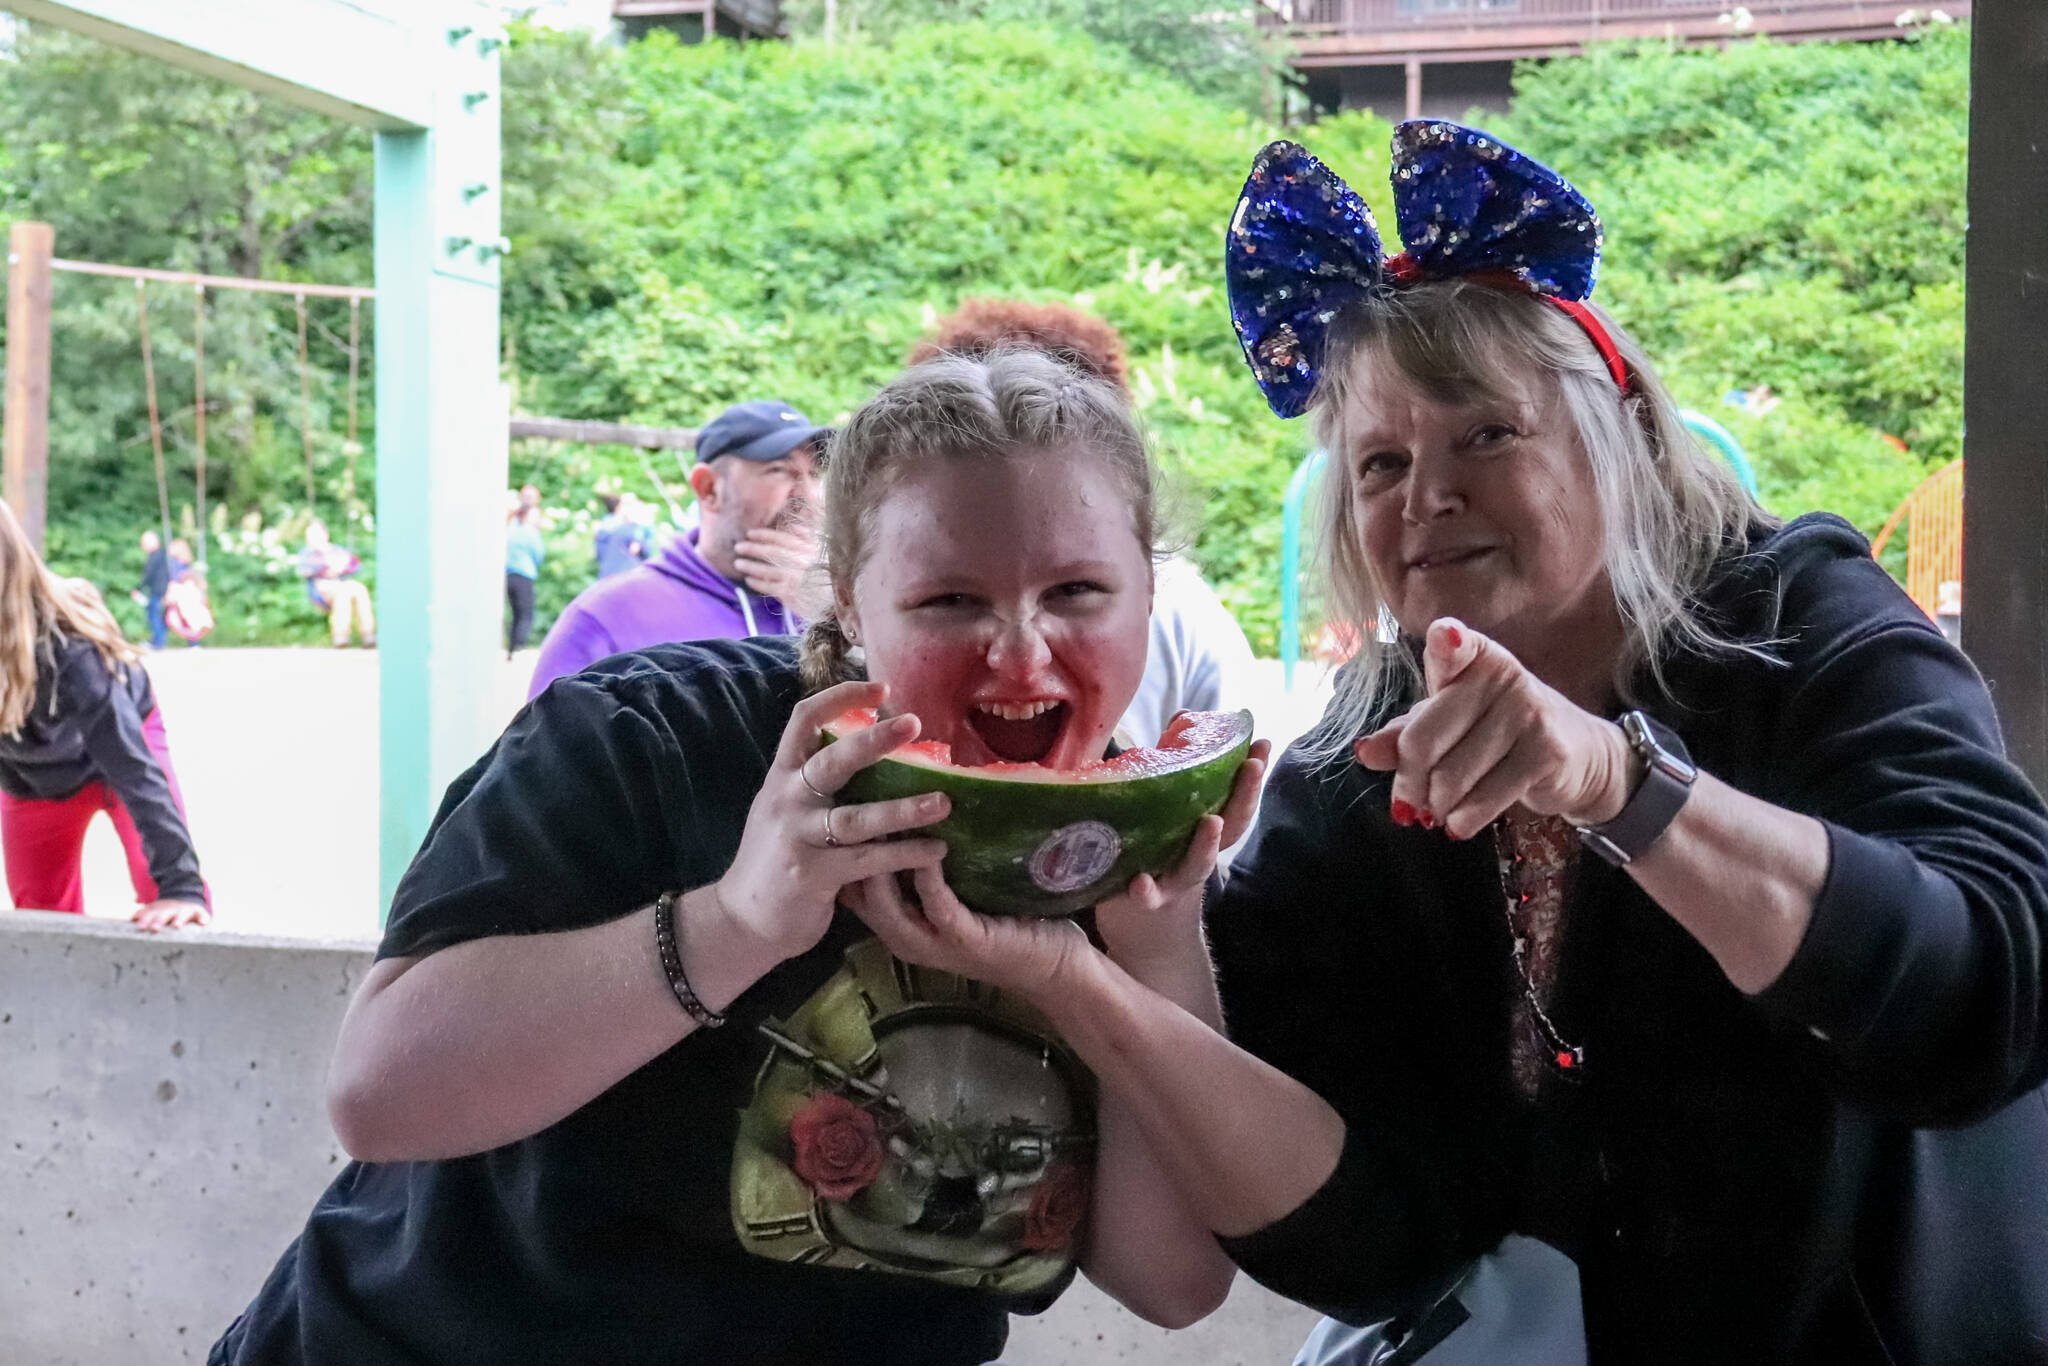 Brooklyn Kanouse (left) holds up her finished watermelon with pride at the watermelon-eating contest that happens during the Douglas Fourth of July Committee’s annual community picnic. (Jasz Garrett / Juneau Empire)